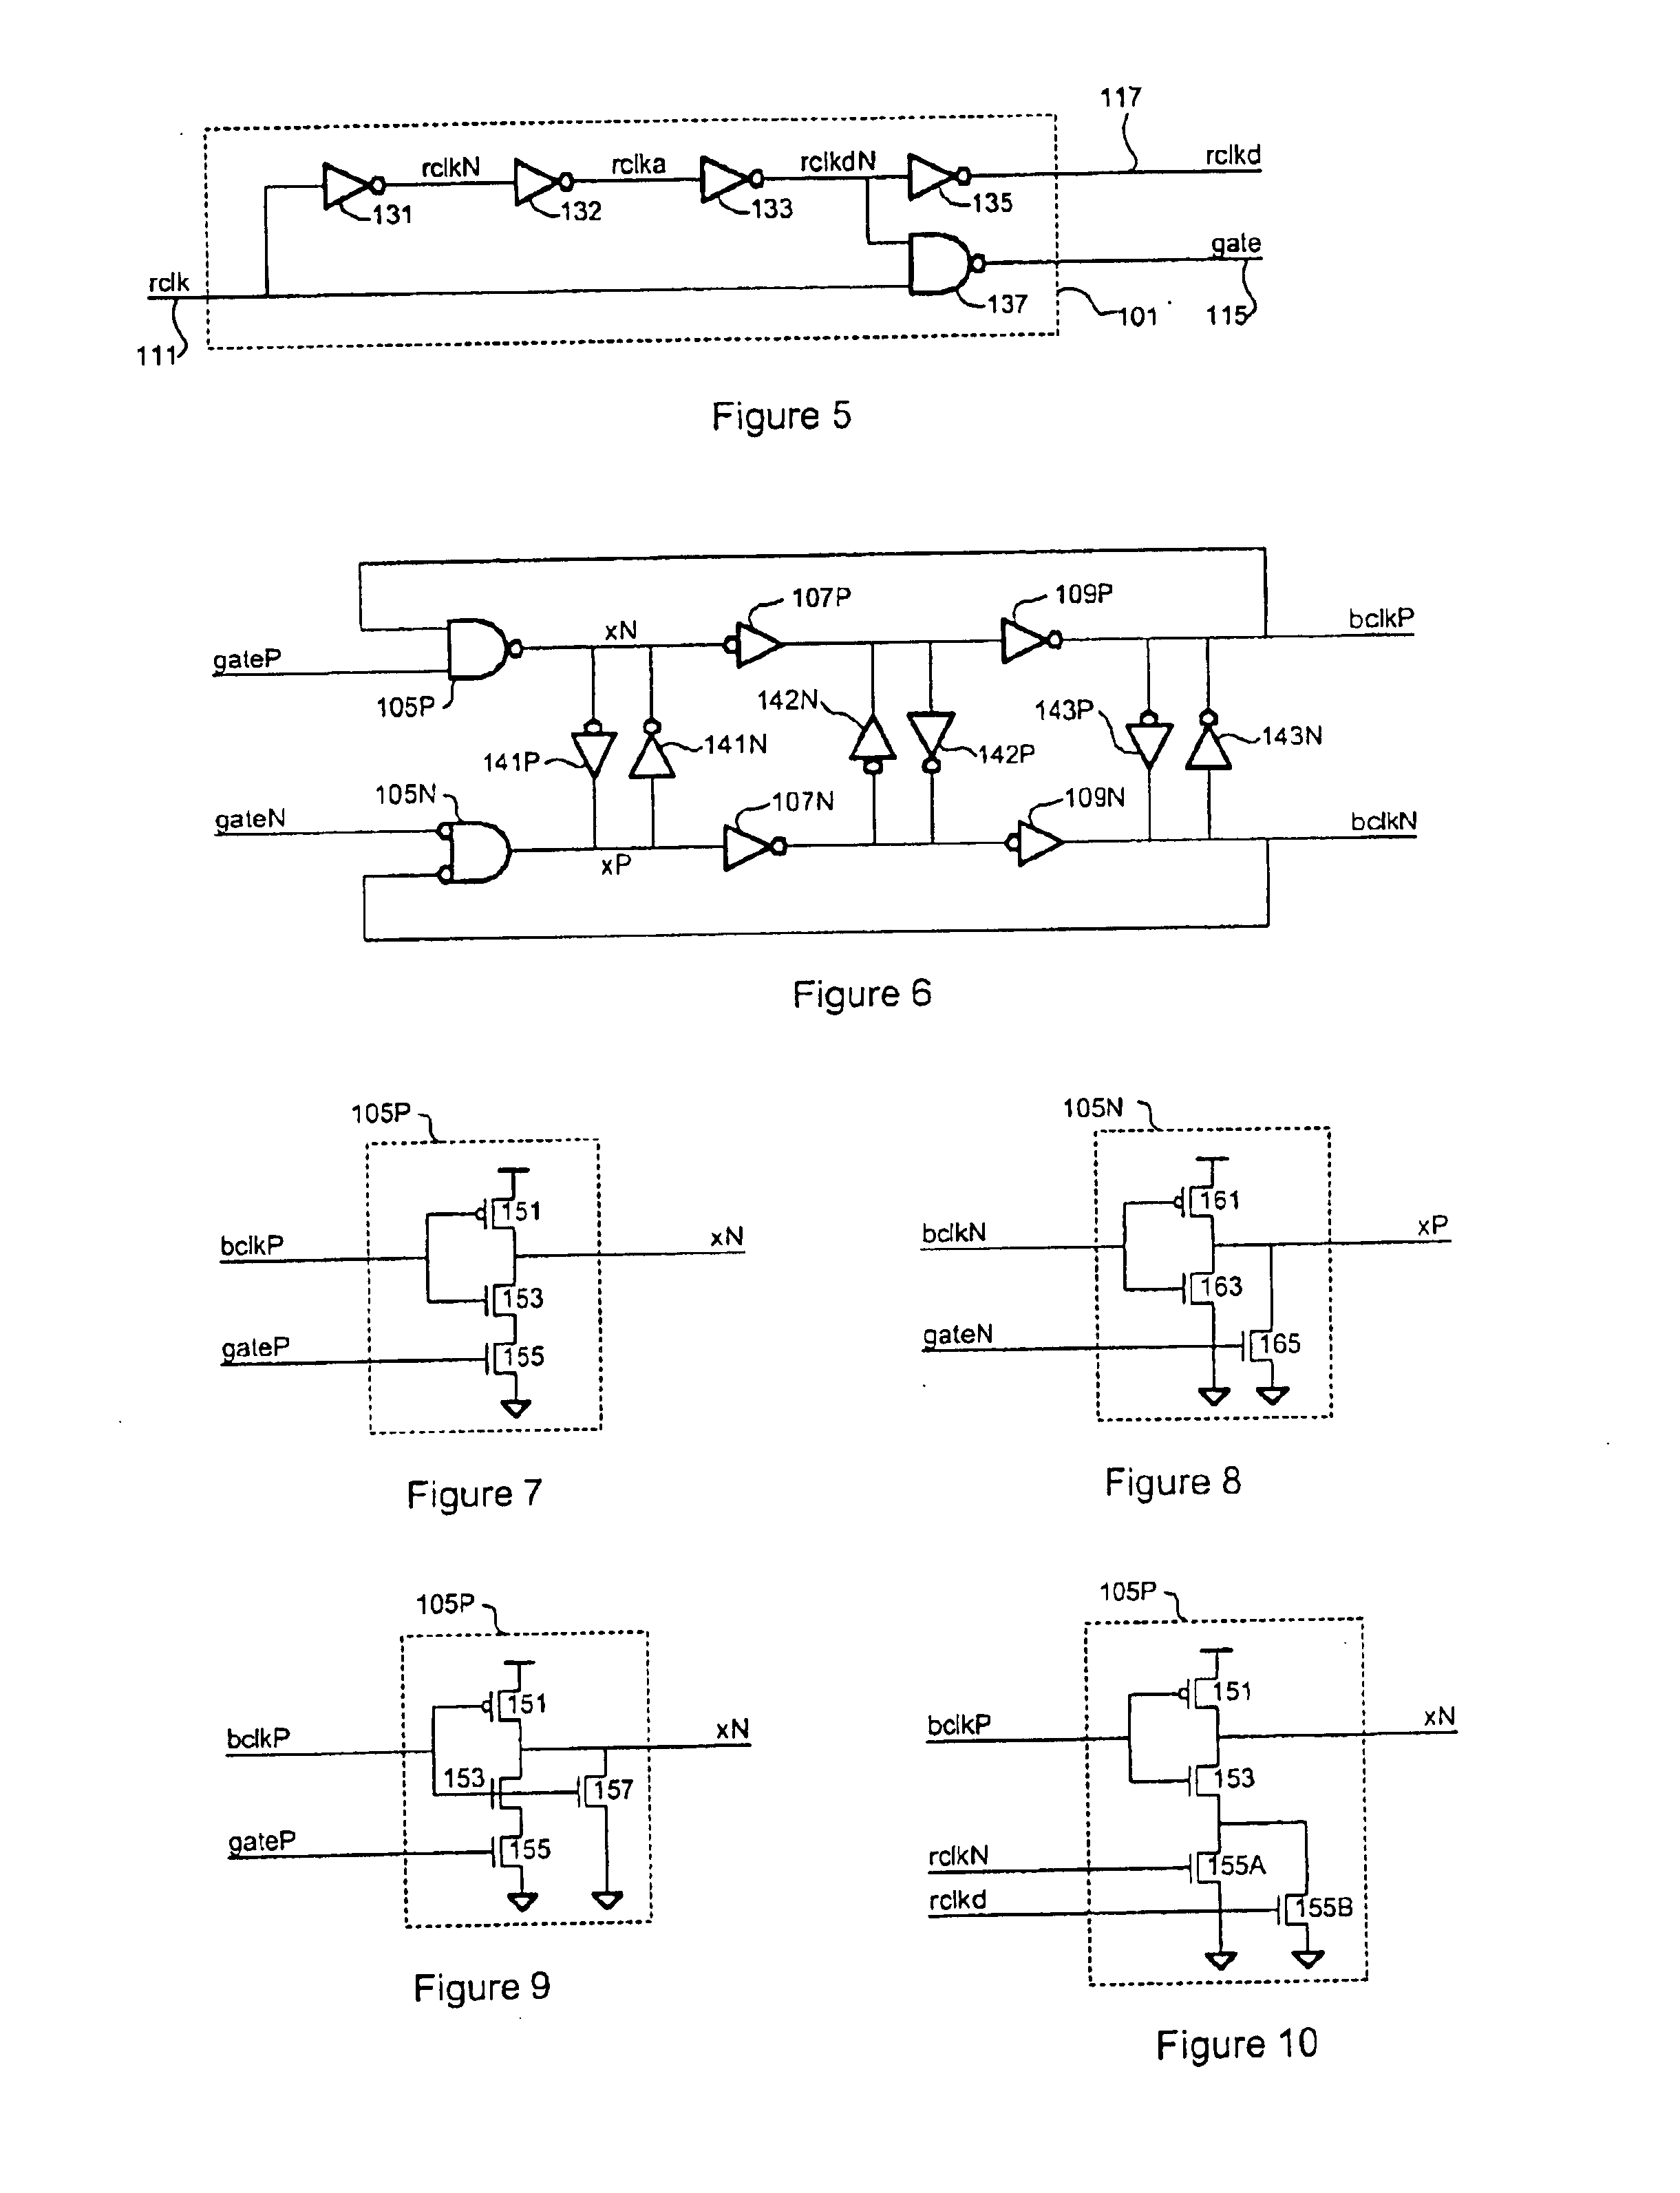 Phase controlled oscillator circuit with input signal coupler